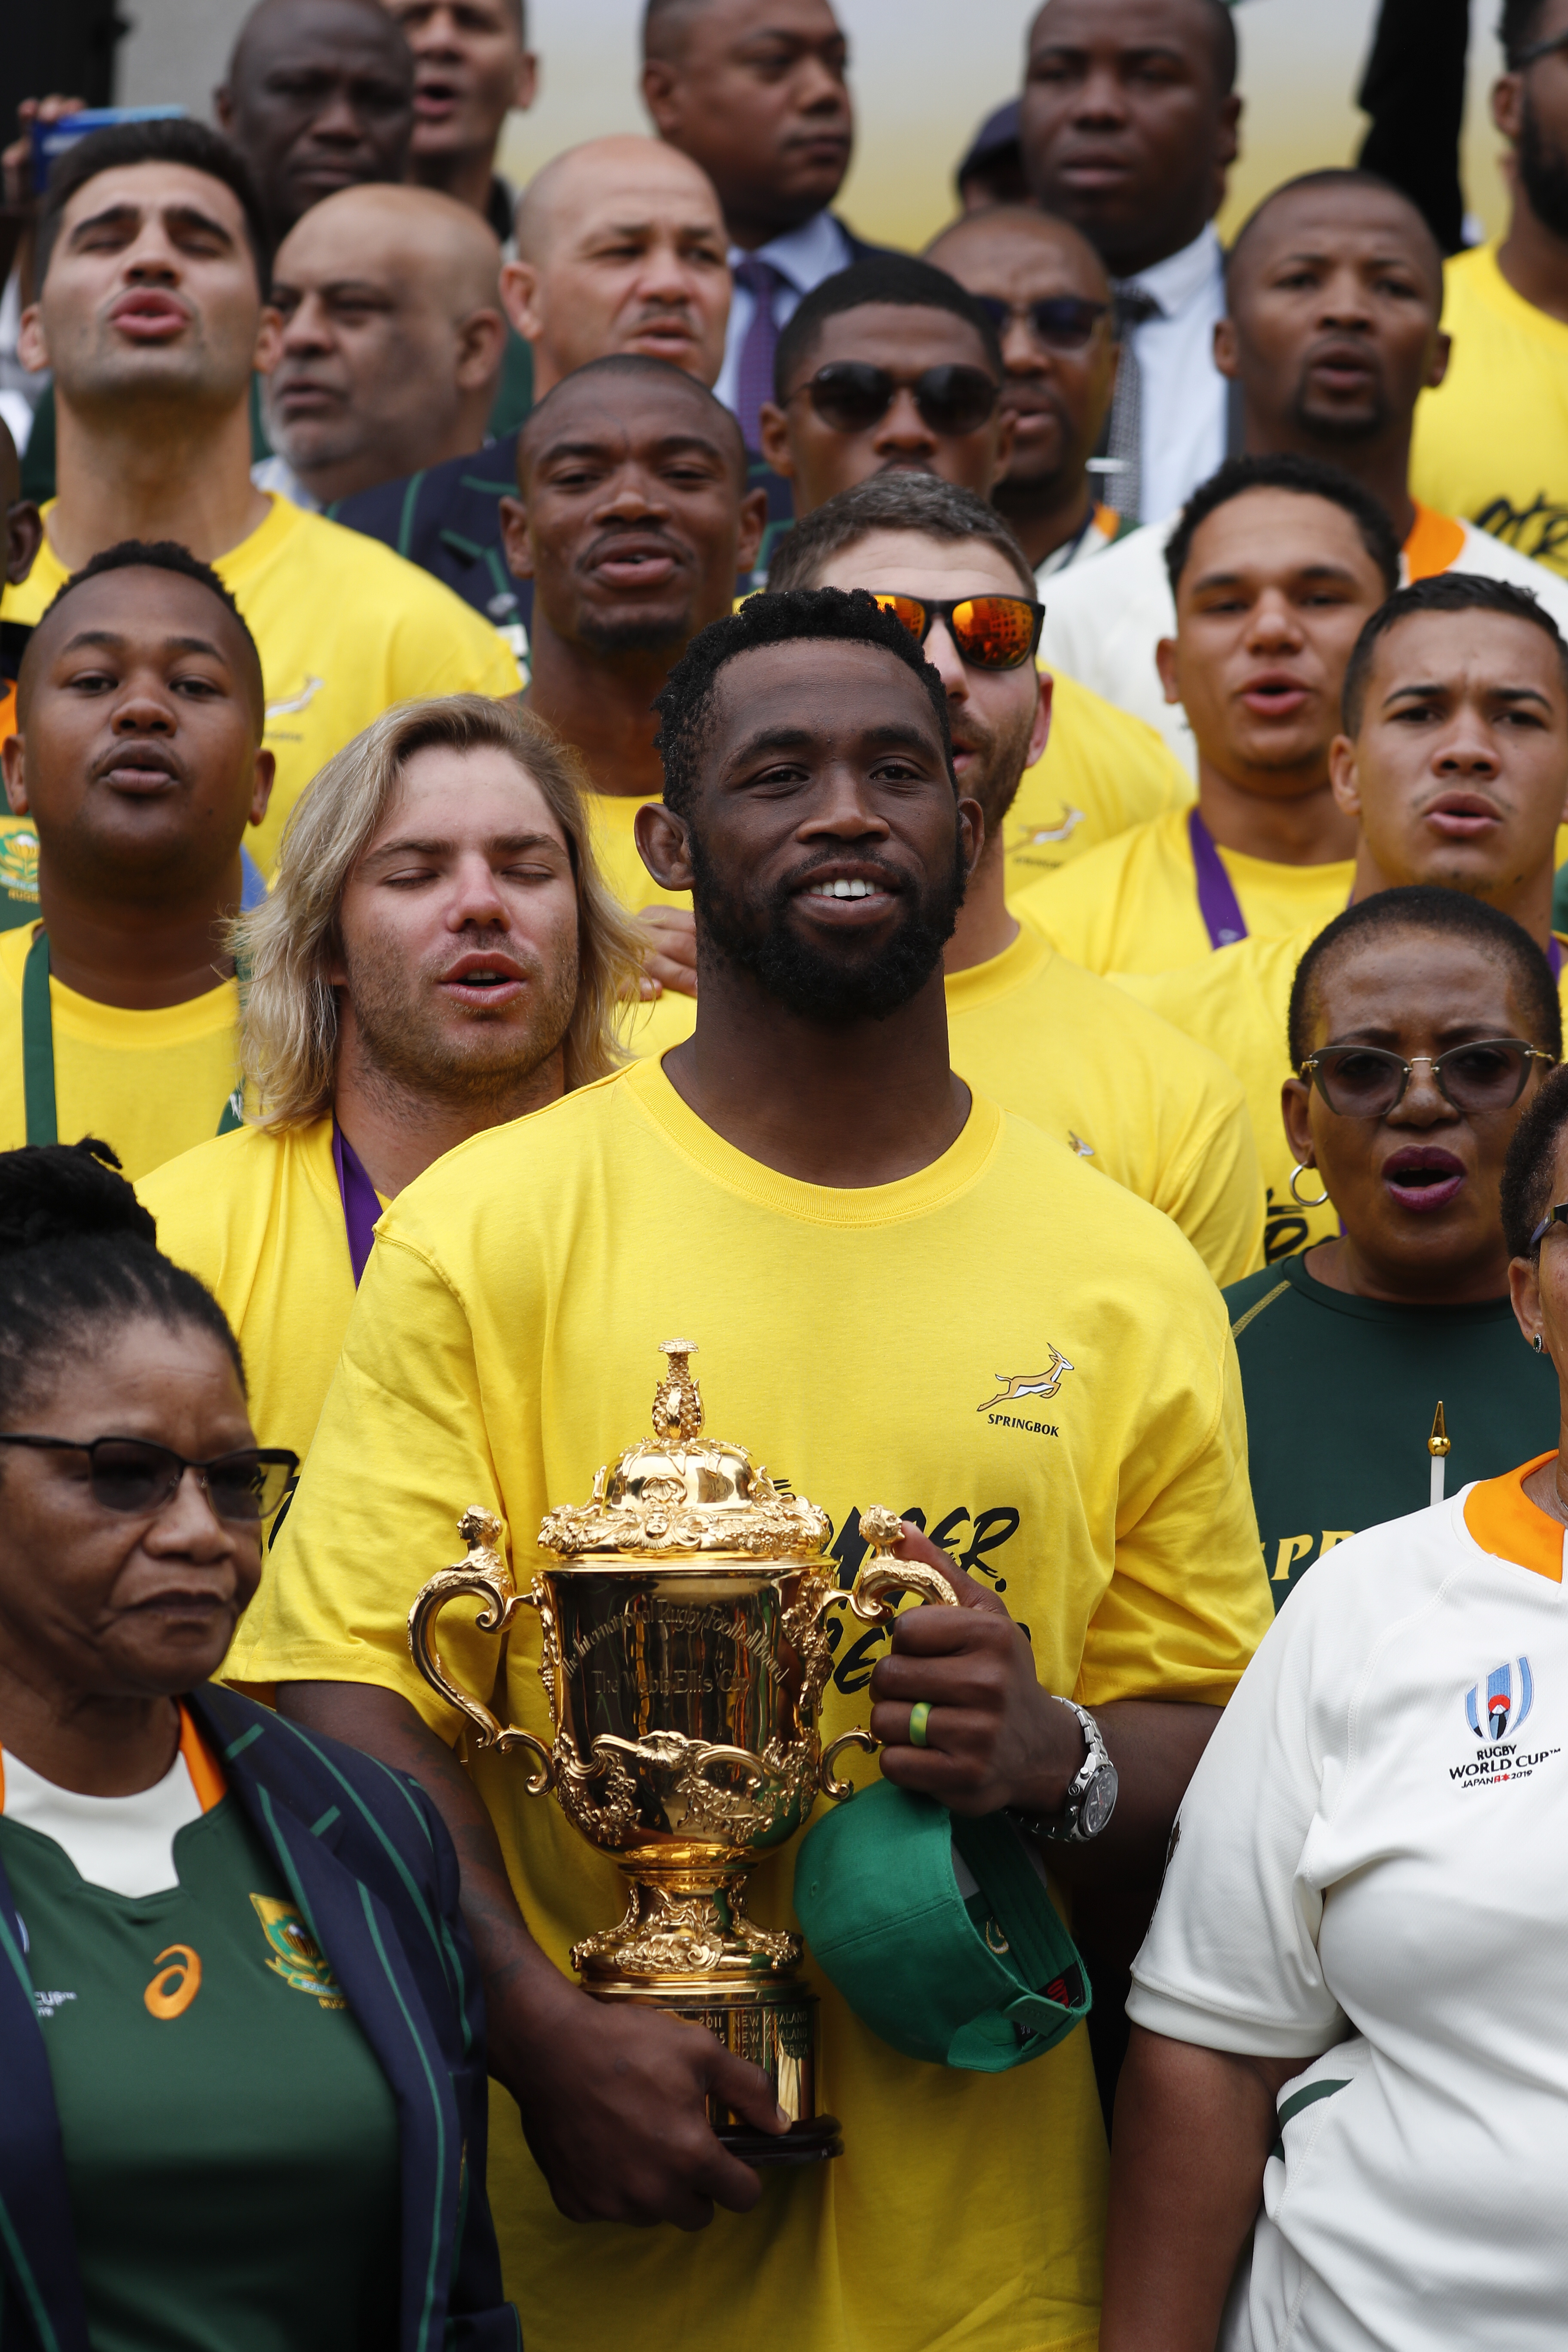 epa07988267 South African rugby captain Siya Kolisi (C) holds the Webb Ellis Cup as he poses for photographs with the team and speaker of parliament Thandi Modise (L) during a trophy tour visit to parliament in Cape Town, South Africa 11 November 2019. Tens of thousands of South Africans came out to see the Springboks finish their nation wide trophy tour in Cape Town after winning the Rugby World Cup. South Africa won the Webb Ellis Cup after defeating England 32-12 in the Rugby World Cup final played in Japan on 02 November 2019. EPA/NIC BOTHMA